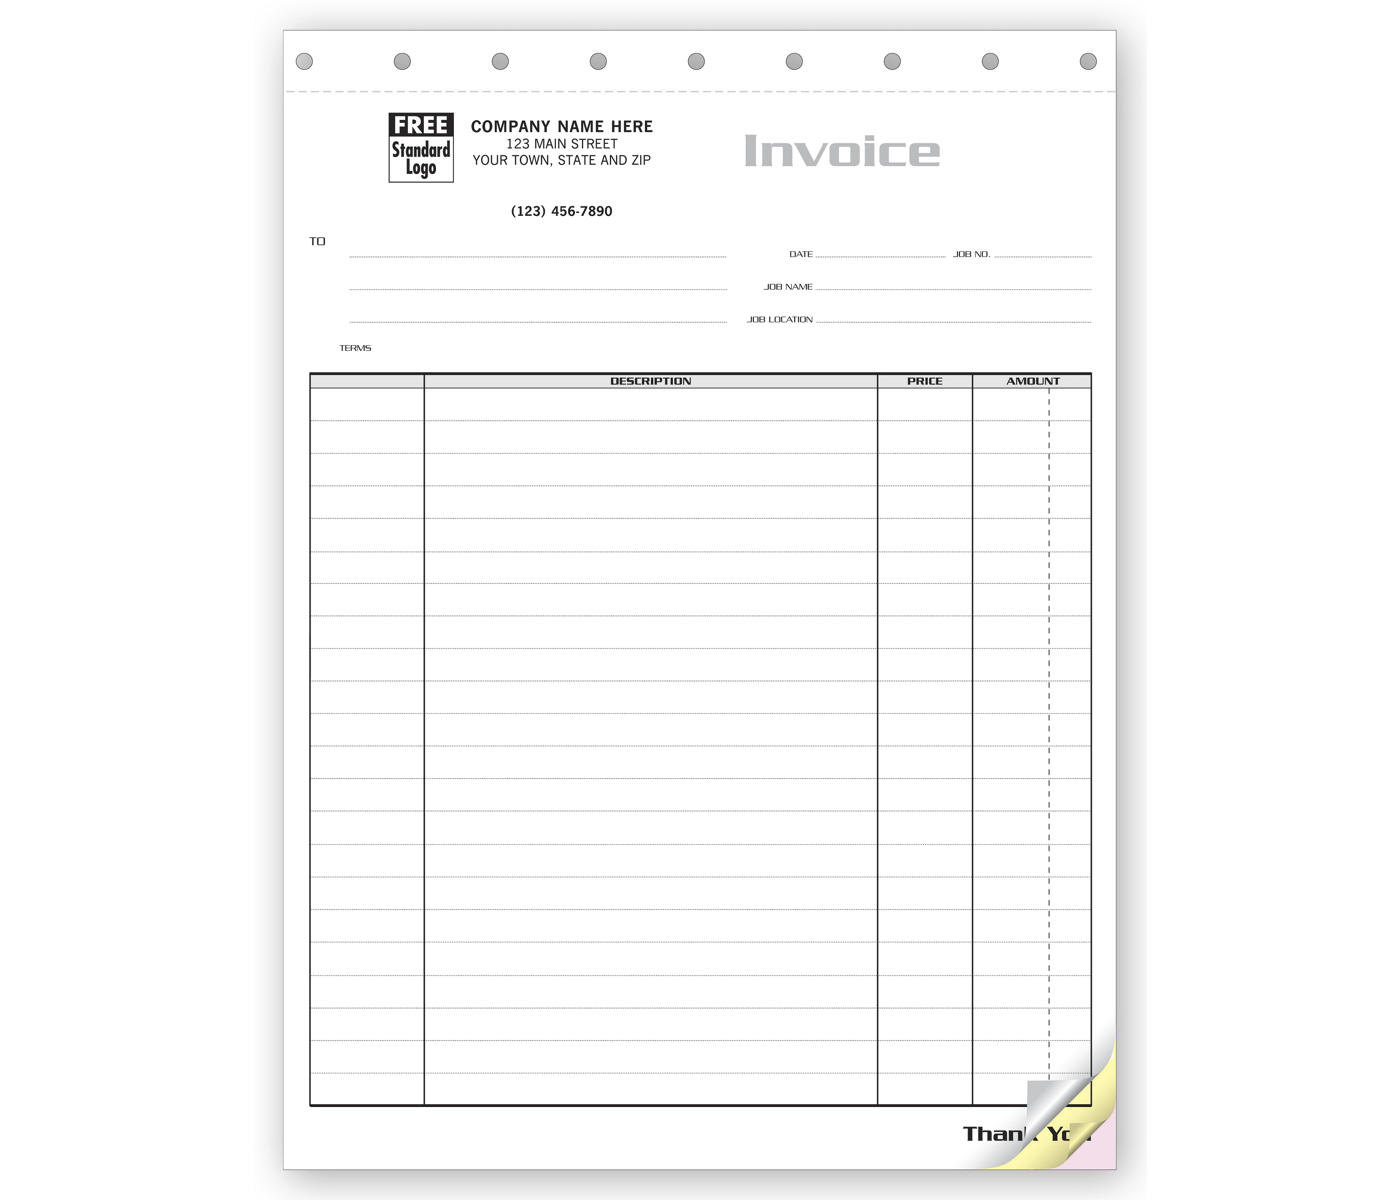 Contractor Invoice - Itemized Invoice for Large Jobs